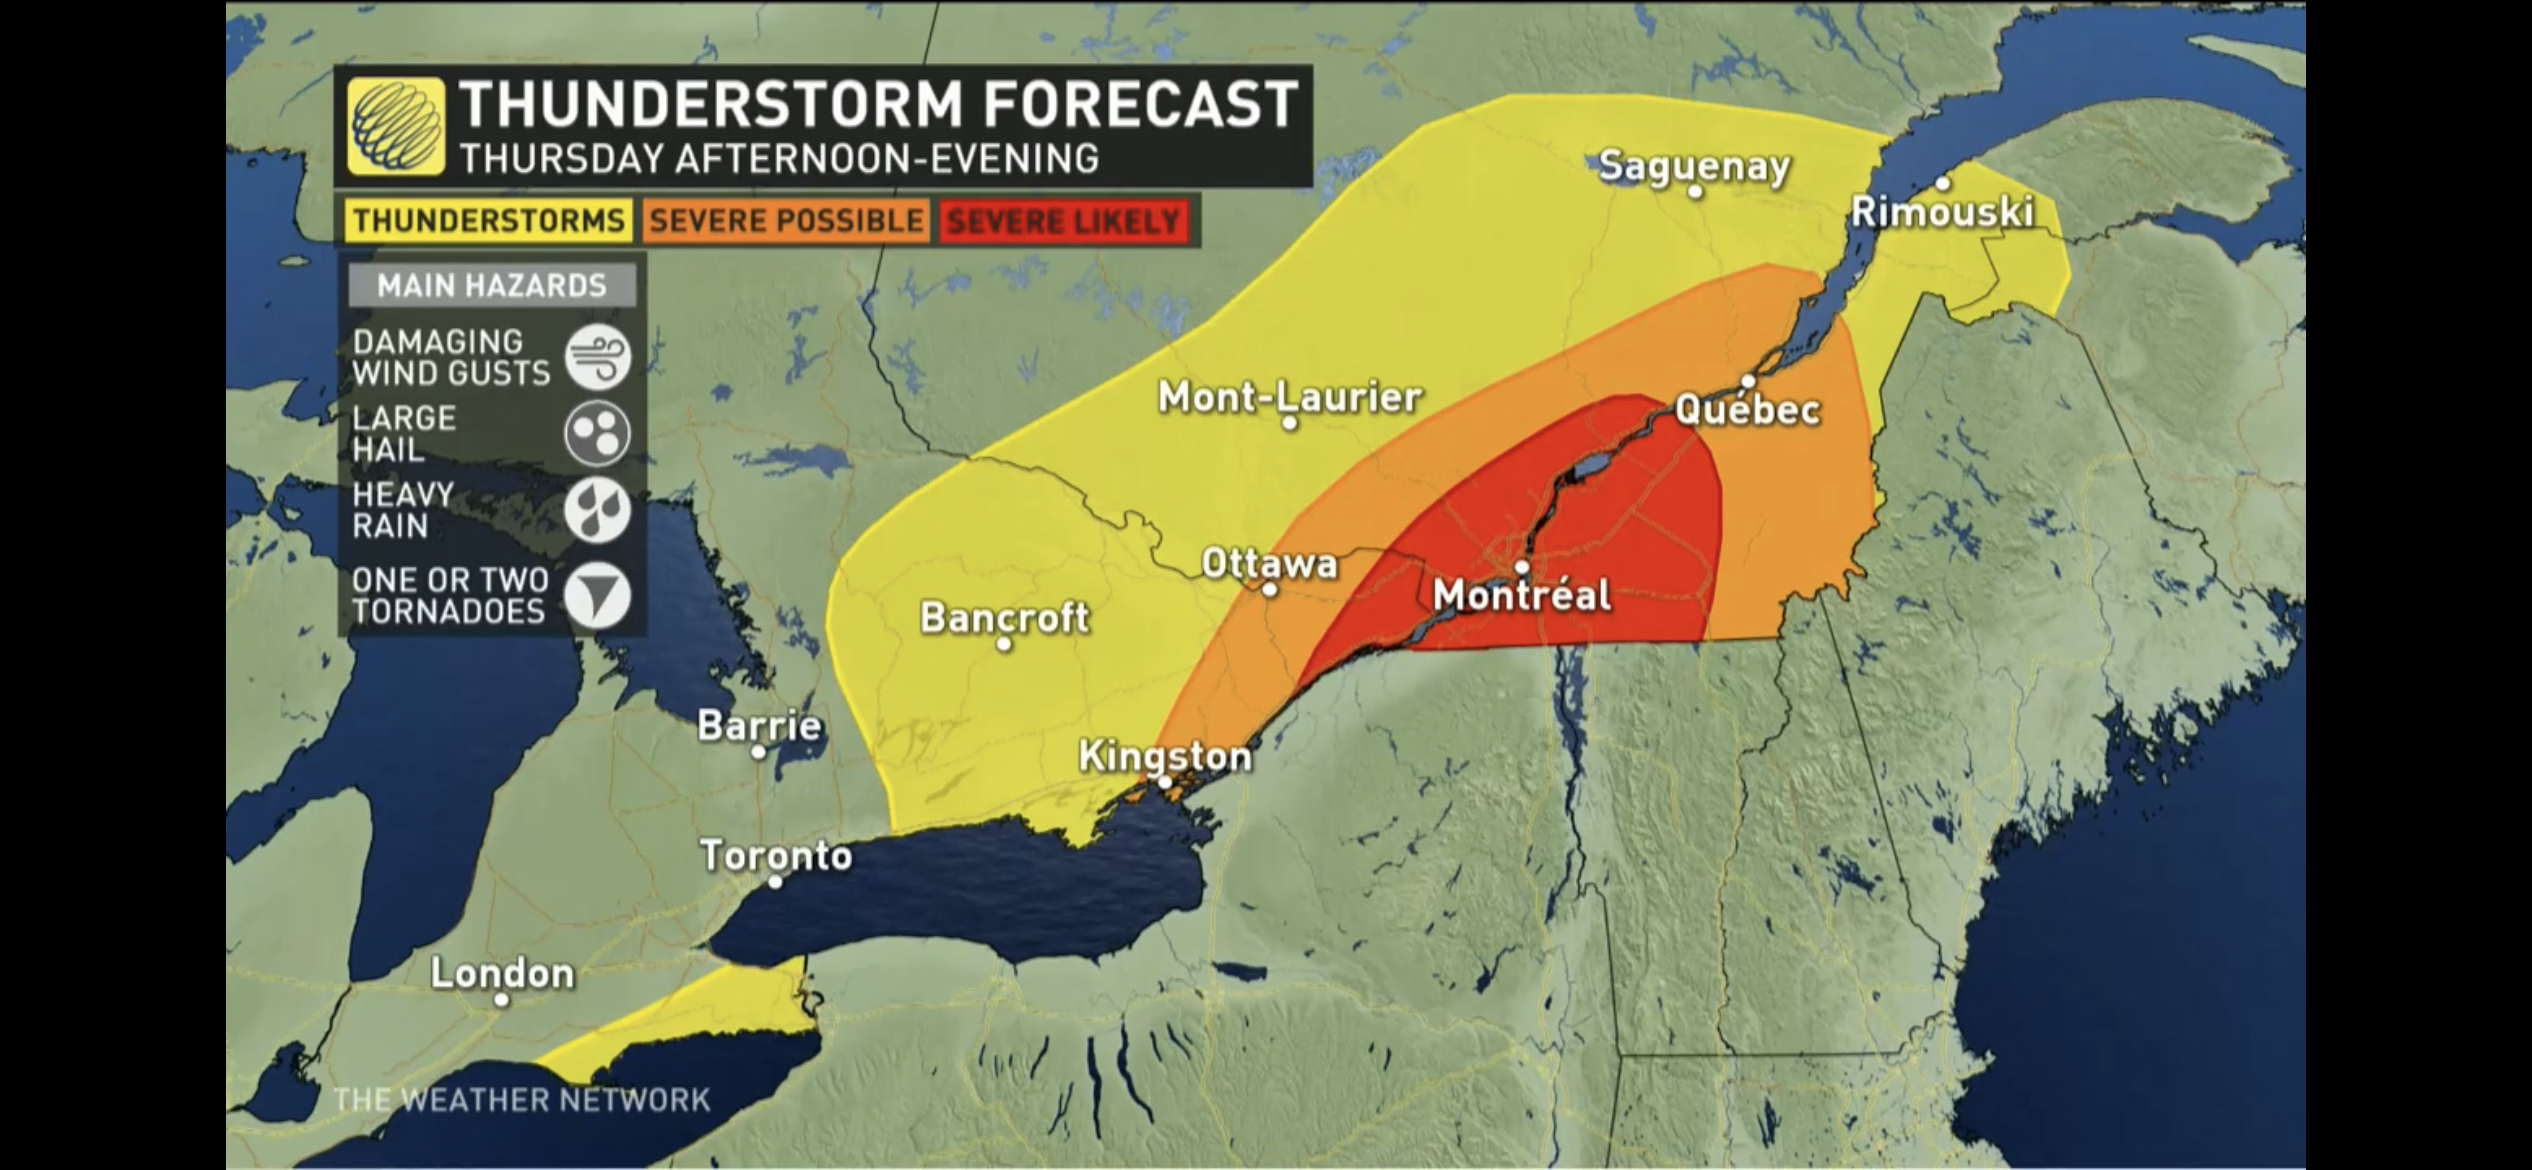 A screenshot from the Weather Network showing the forecast of “superstorm” likelihood in the St-Lawrence valley. Montreal is rated “sever likely” and should expect hail, high winds, and perhaps even tornadoes.